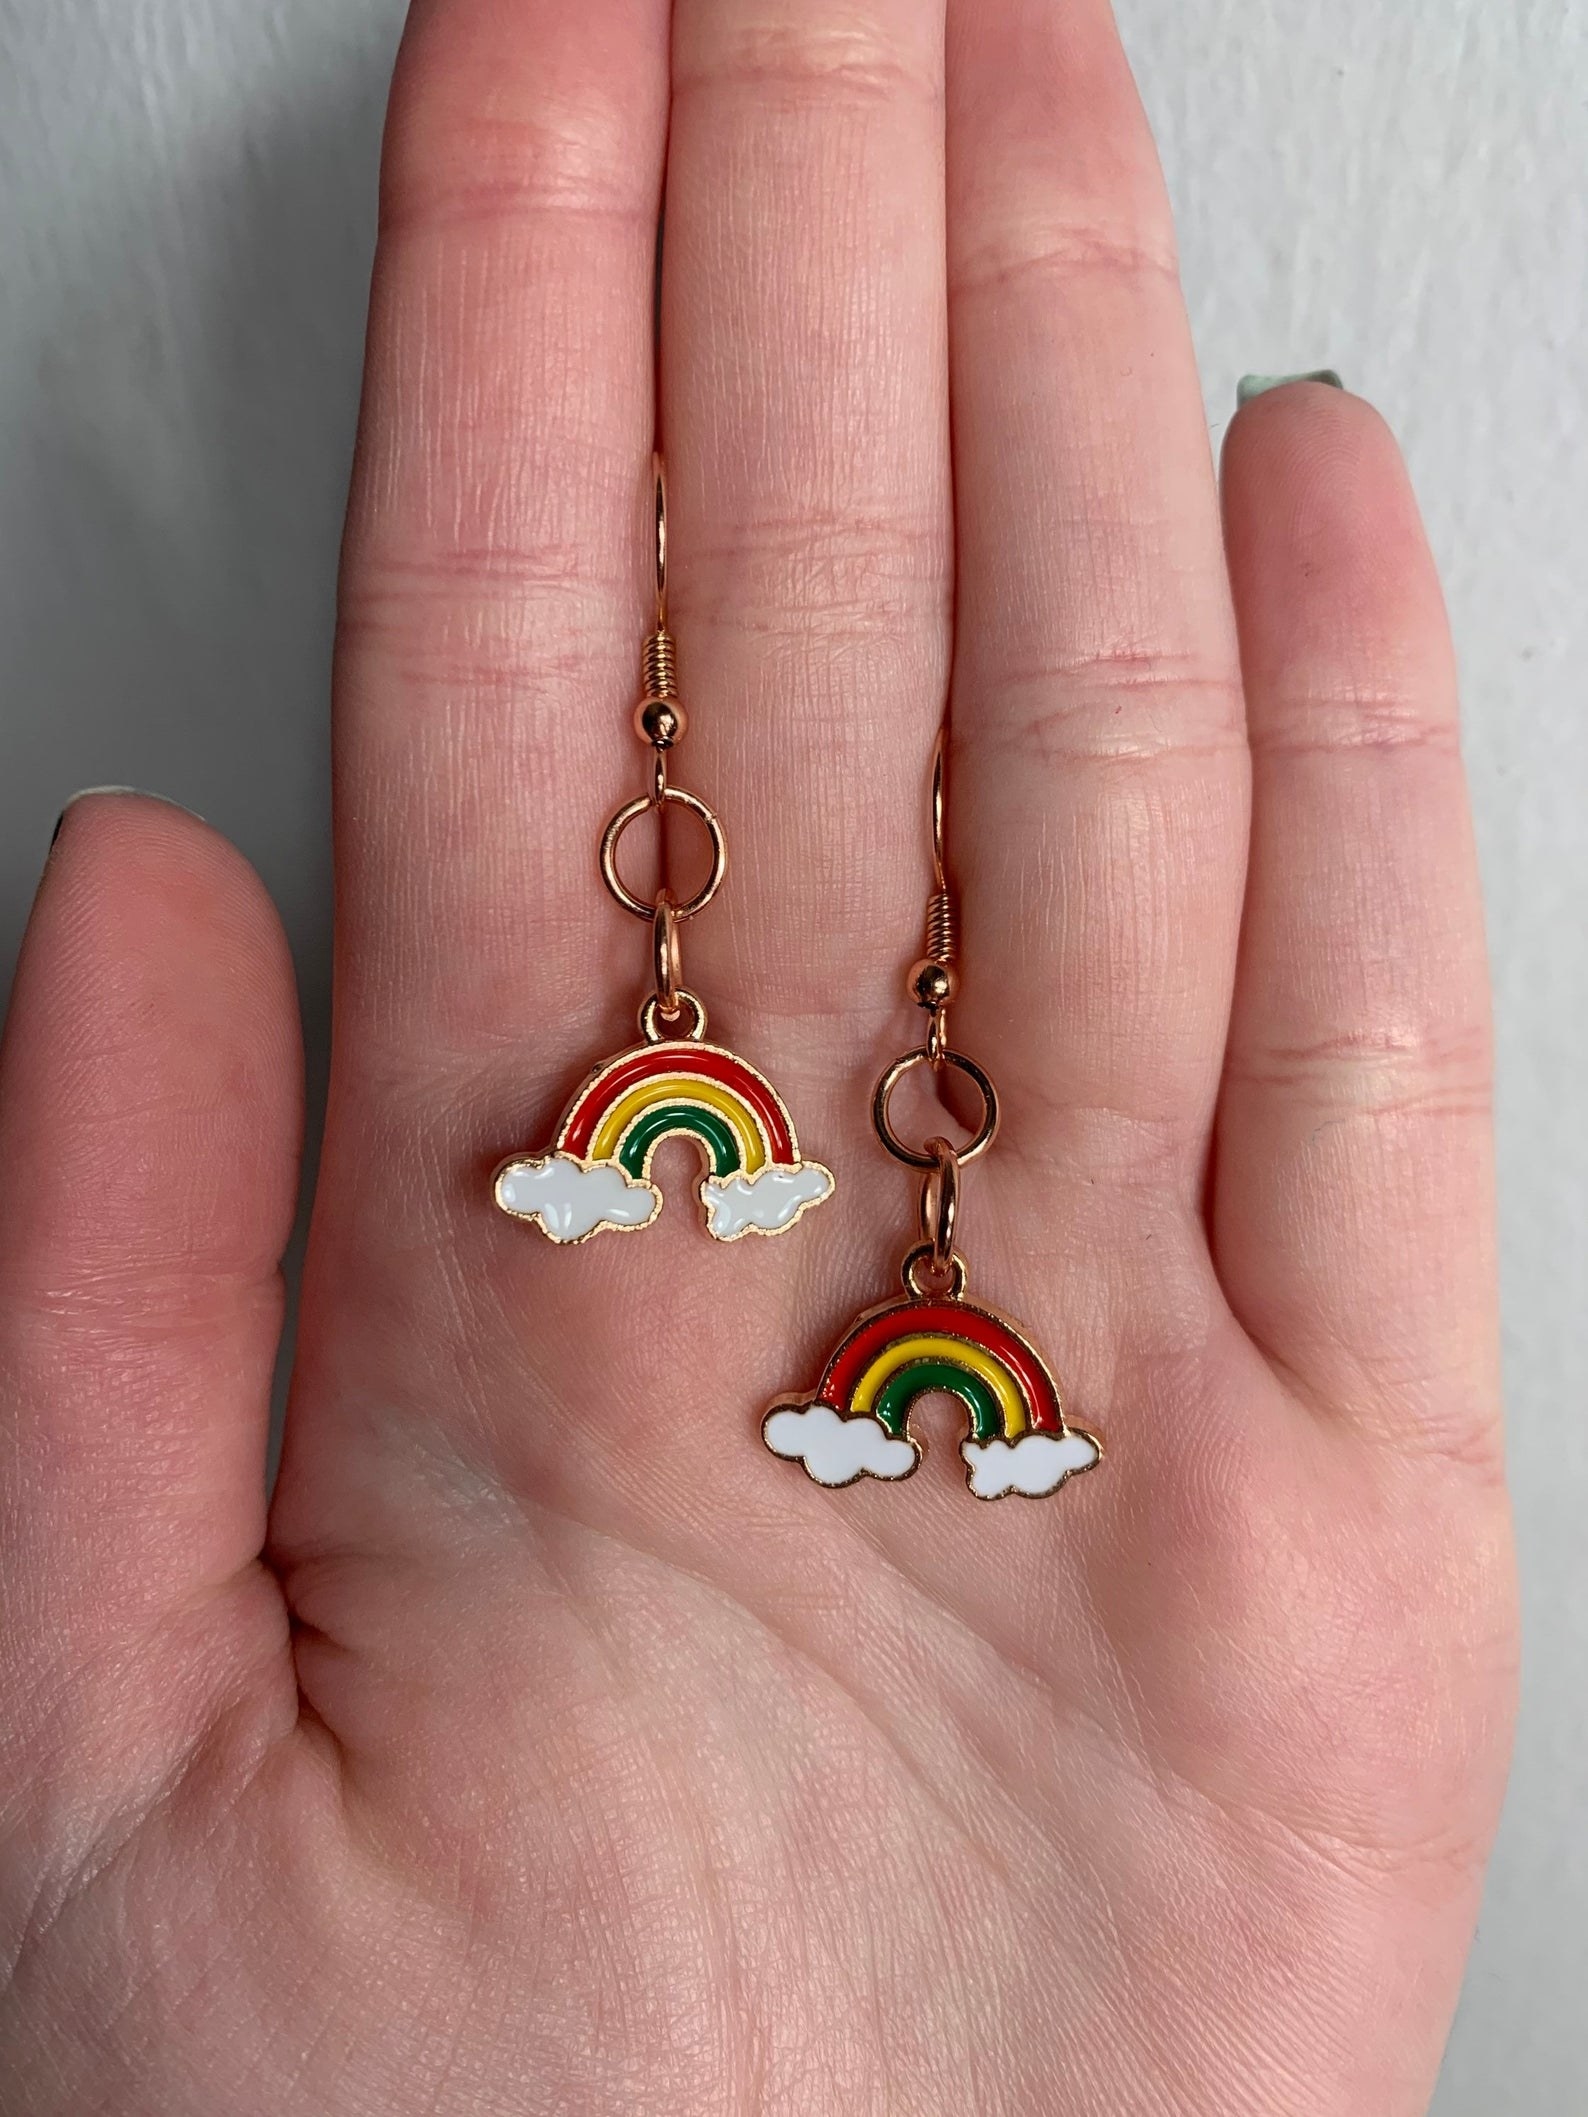 hand holding two earrings shaped like cows